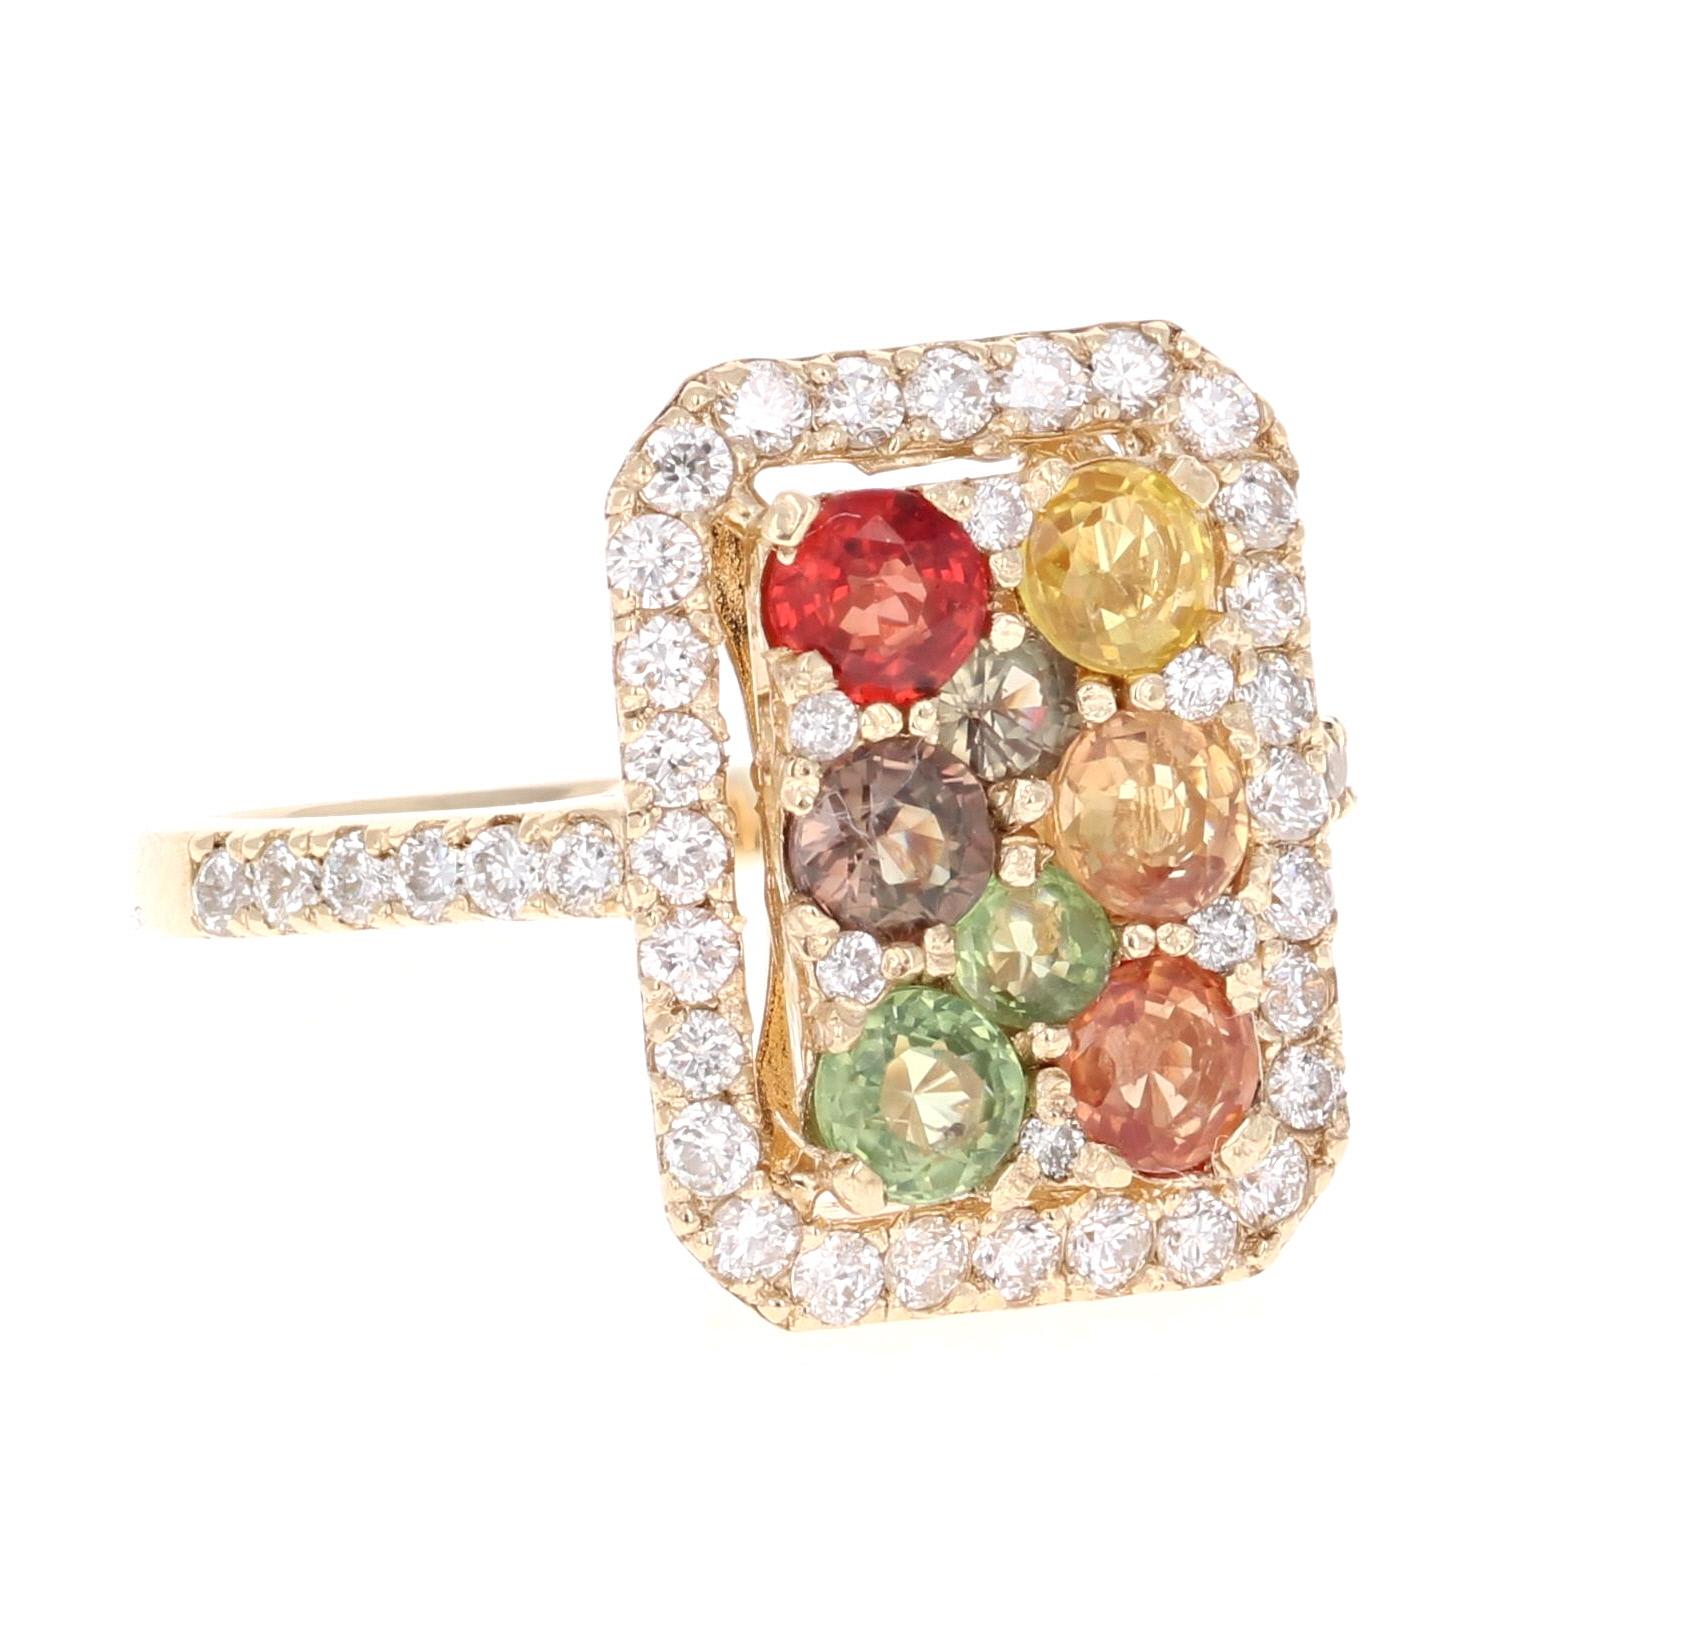 Uniquely Designed into a Masterpiece! 

This beautiful Ring has a cluster of Multi-Colored Sapphires and Diamonds that are carefully placed to create a unique design. It has 8 Multi-Colored Sapphires that weigh 1.60 carats and 46 Round Cut Diamonds